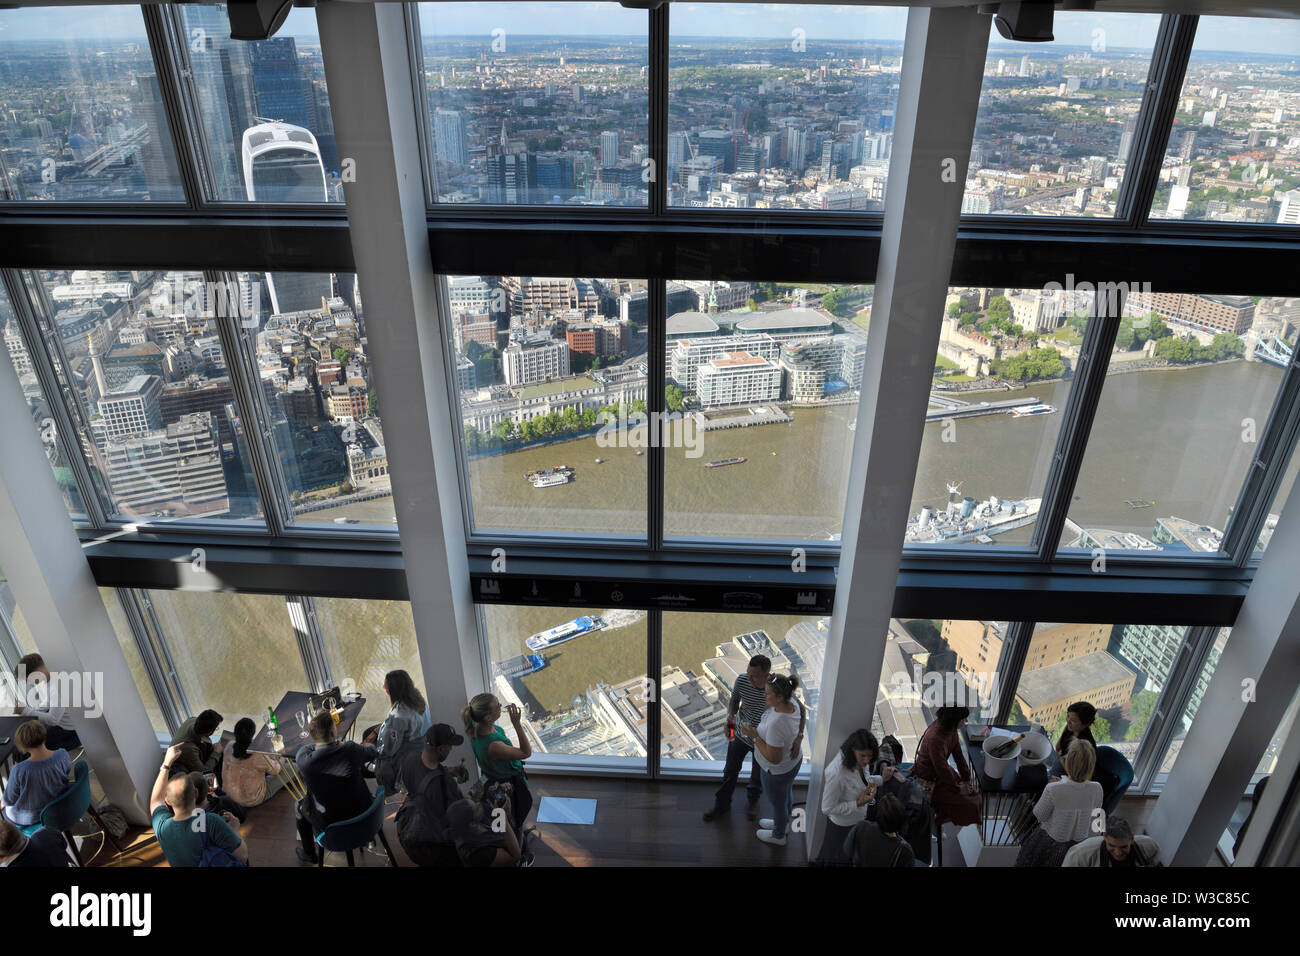 Public viewing gallery from the 72nd floor open observation deck of the Shard with windows to views of the Thames river London England Stock Photo